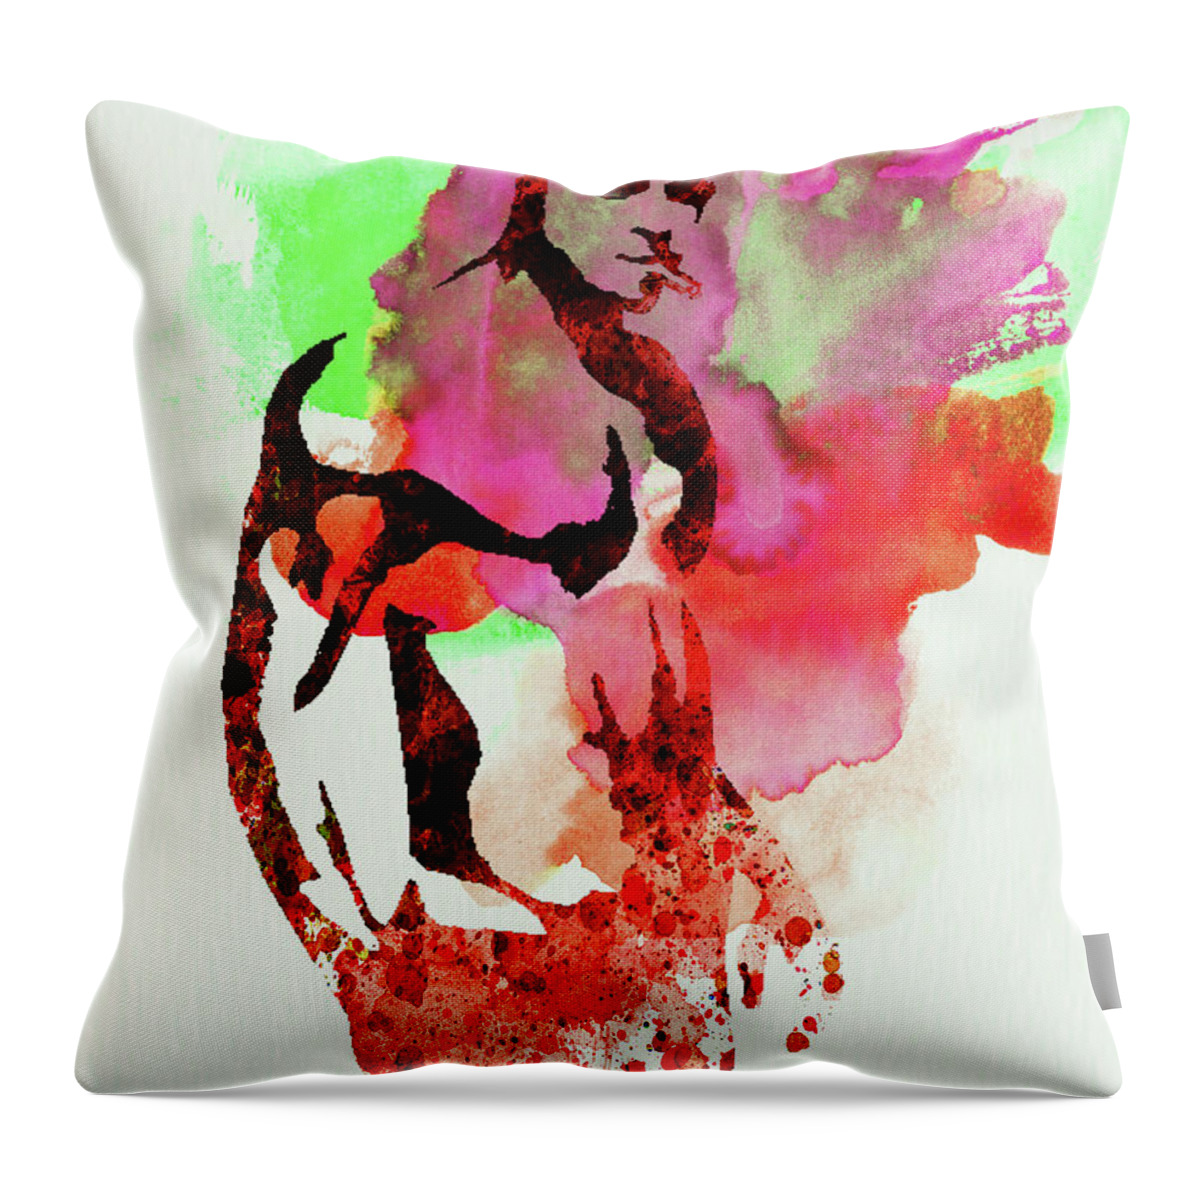 Fight Club Throw Pillow featuring the mixed media Legendary Fight Club Watercolor by Naxart Studio